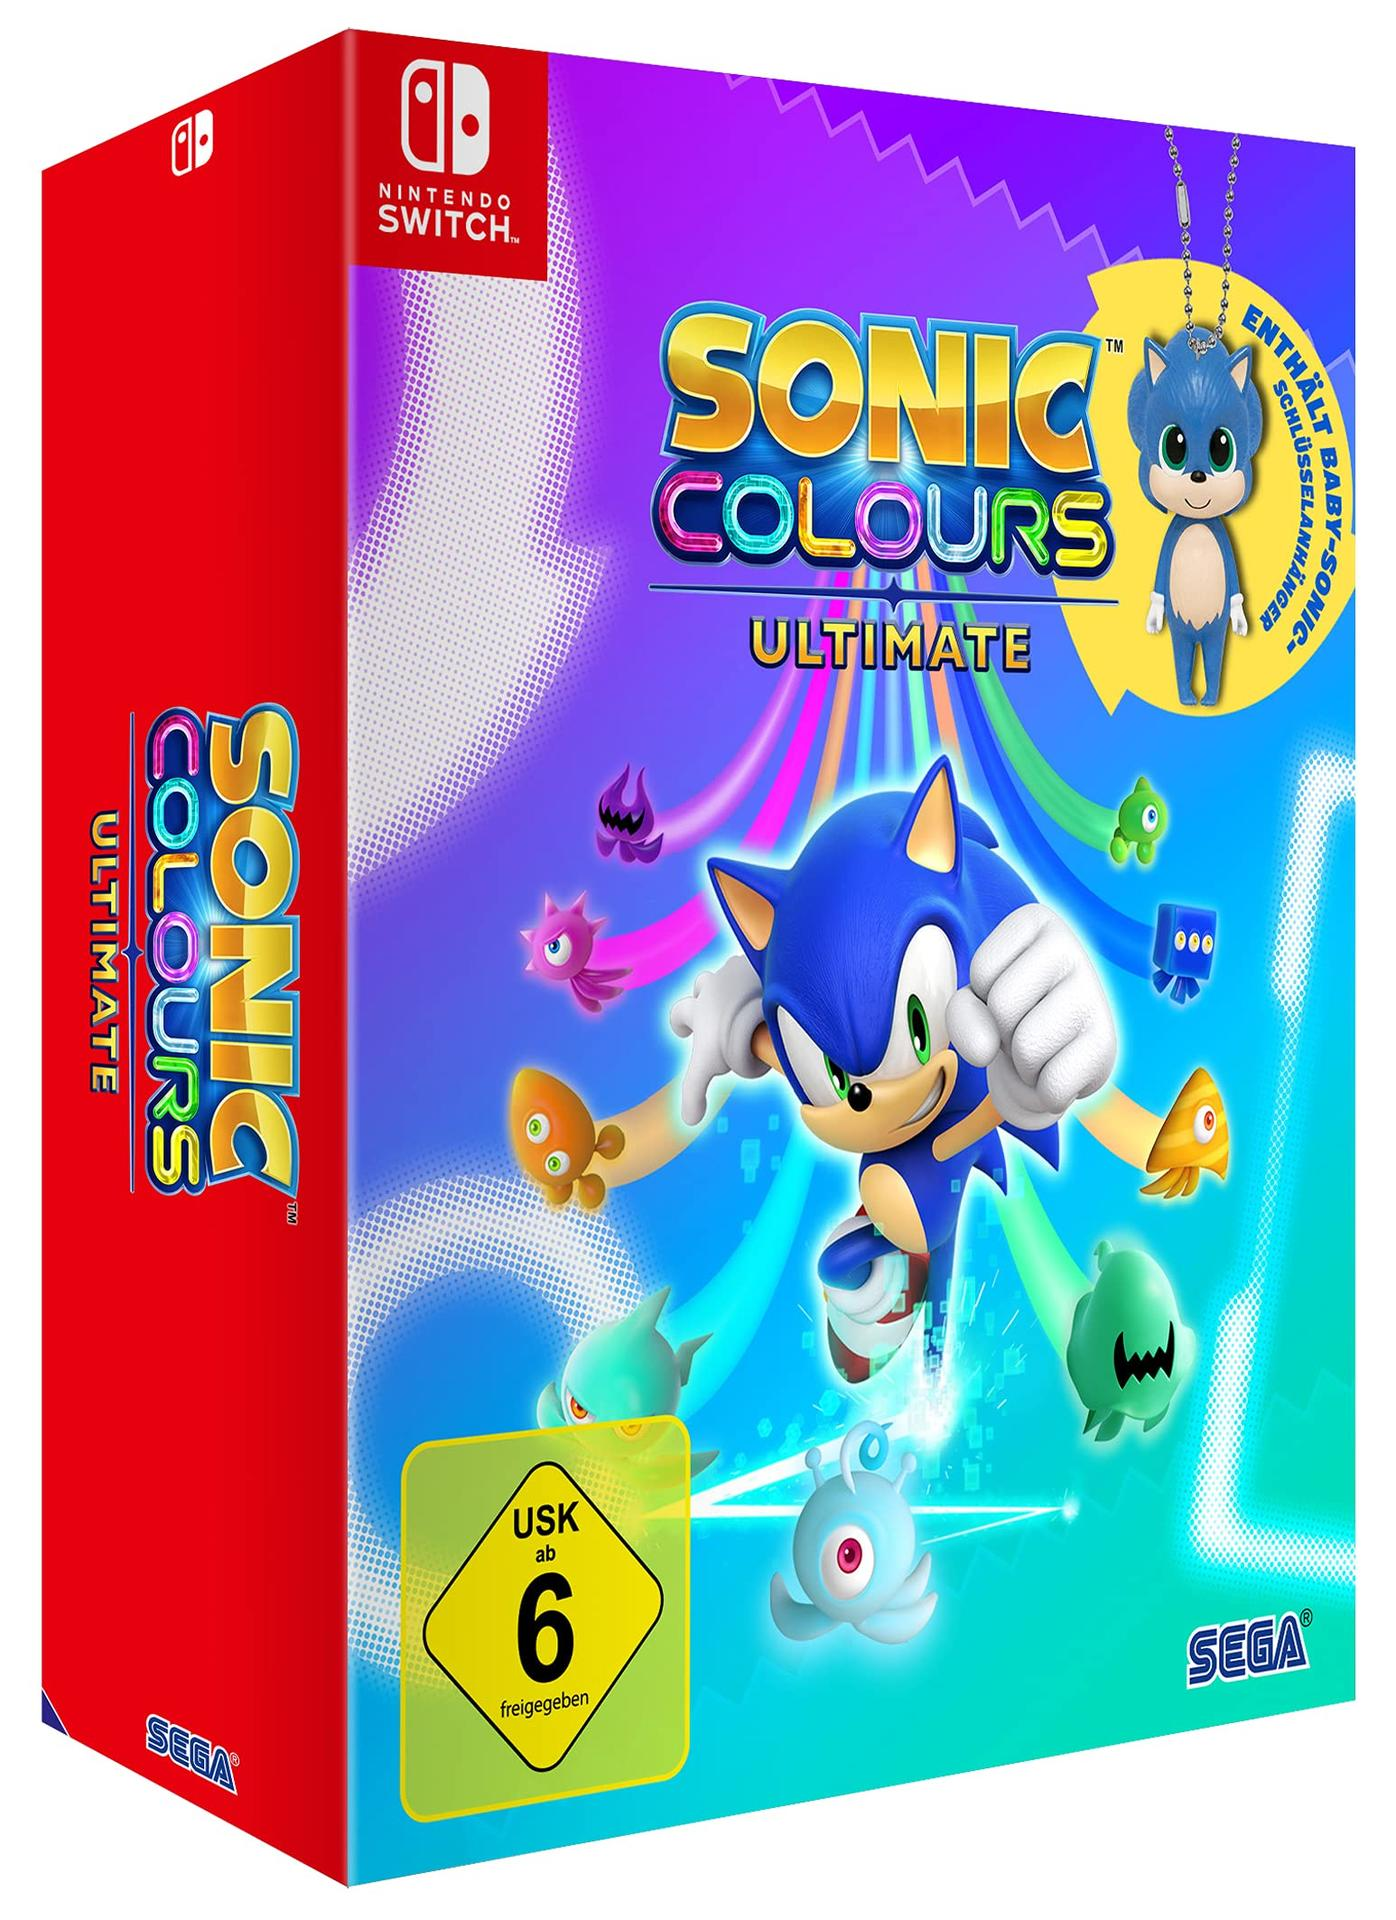 SW LAUNCH SONIC - [Nintendo Switch] ULTIMATE EDITION COLOURS: